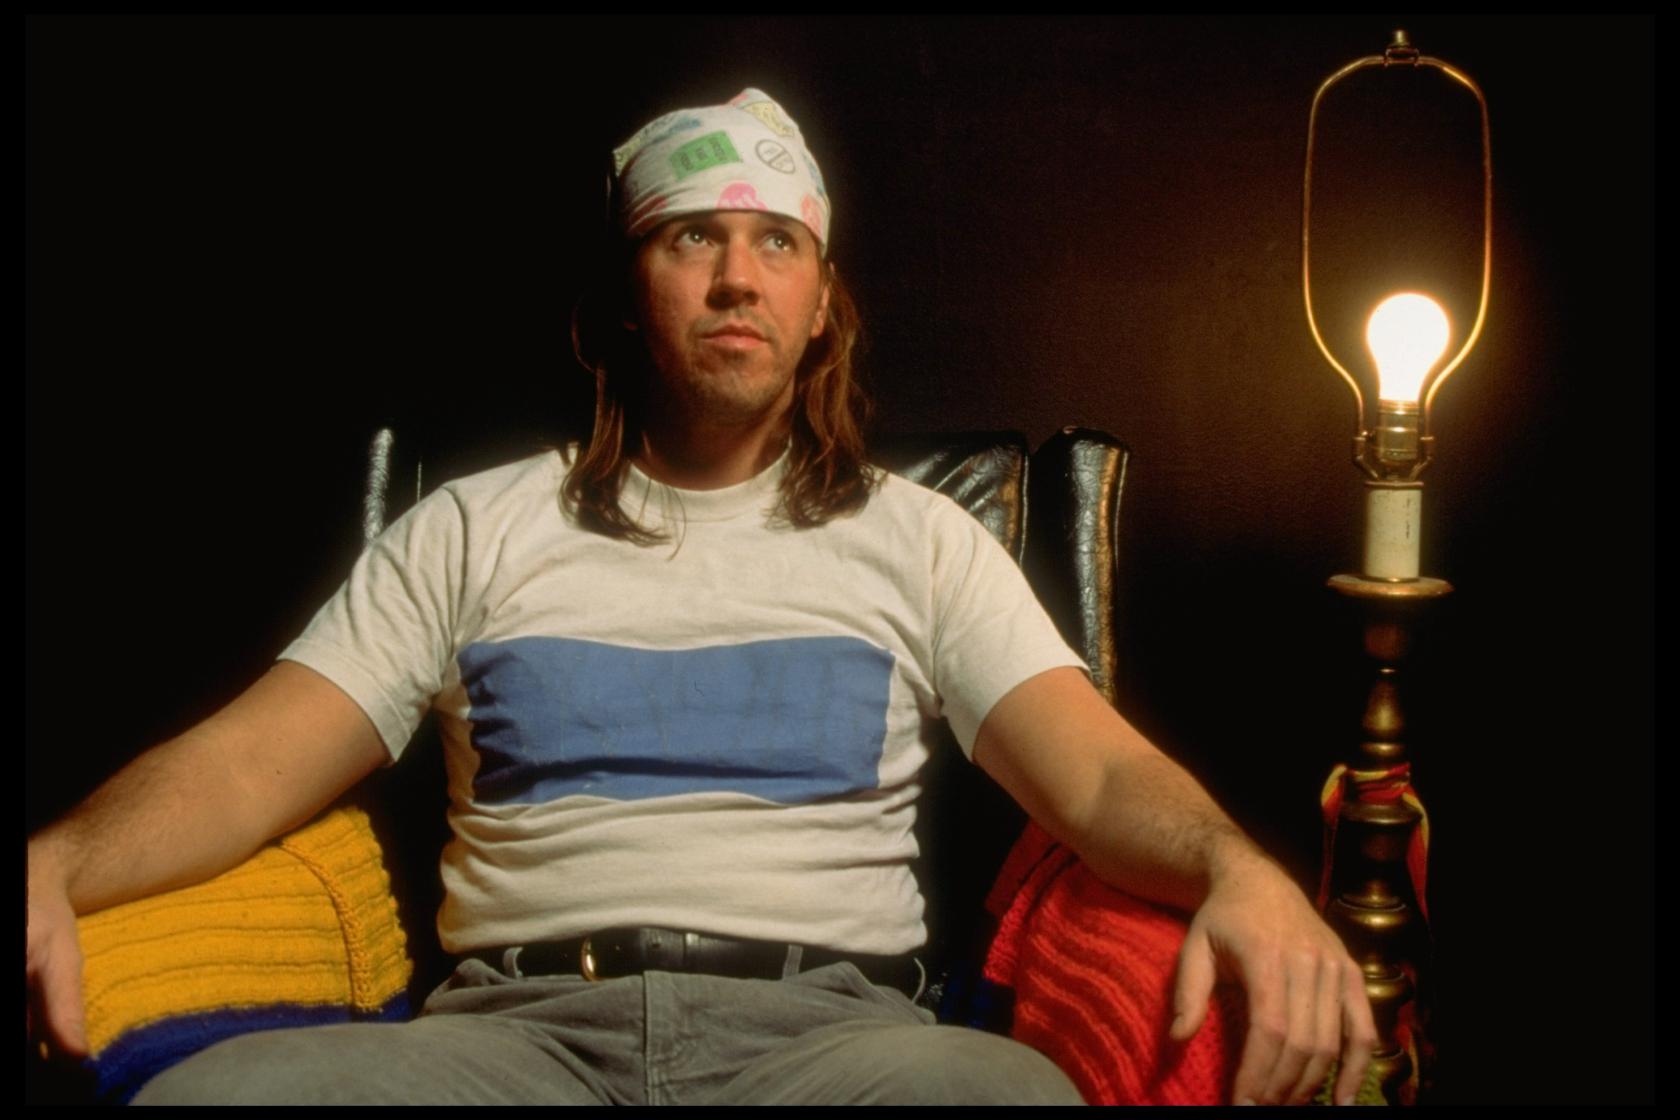 Author David Foster Wallace. (Photo by Steve Liss/The LIFE Images Collection/Getty Images)